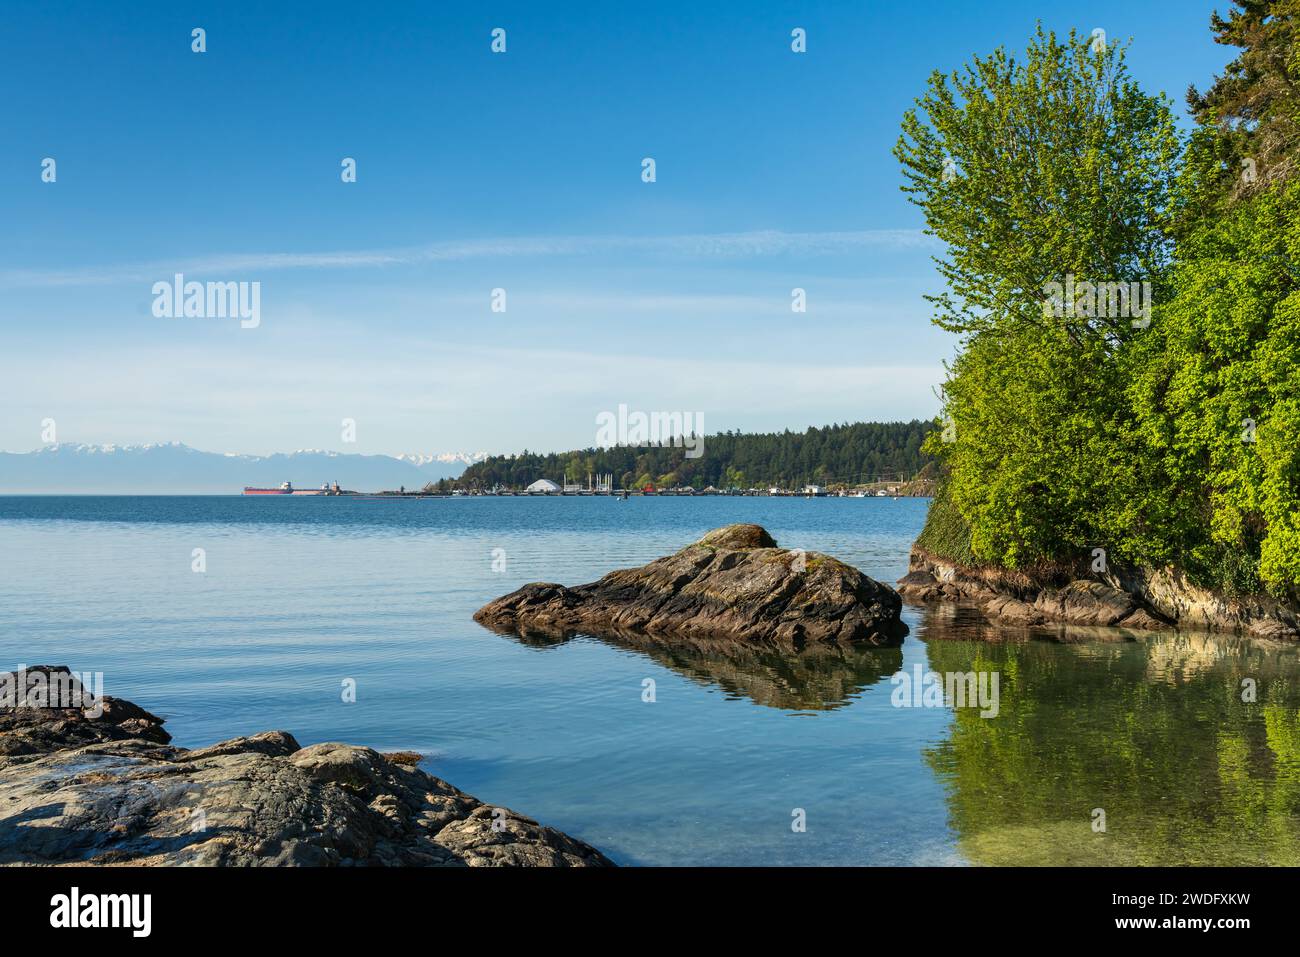 A view over Esquimalt Harbour from Royal View, Victoria, Vancouver Island, British Columbia, Canada. Stock Photo